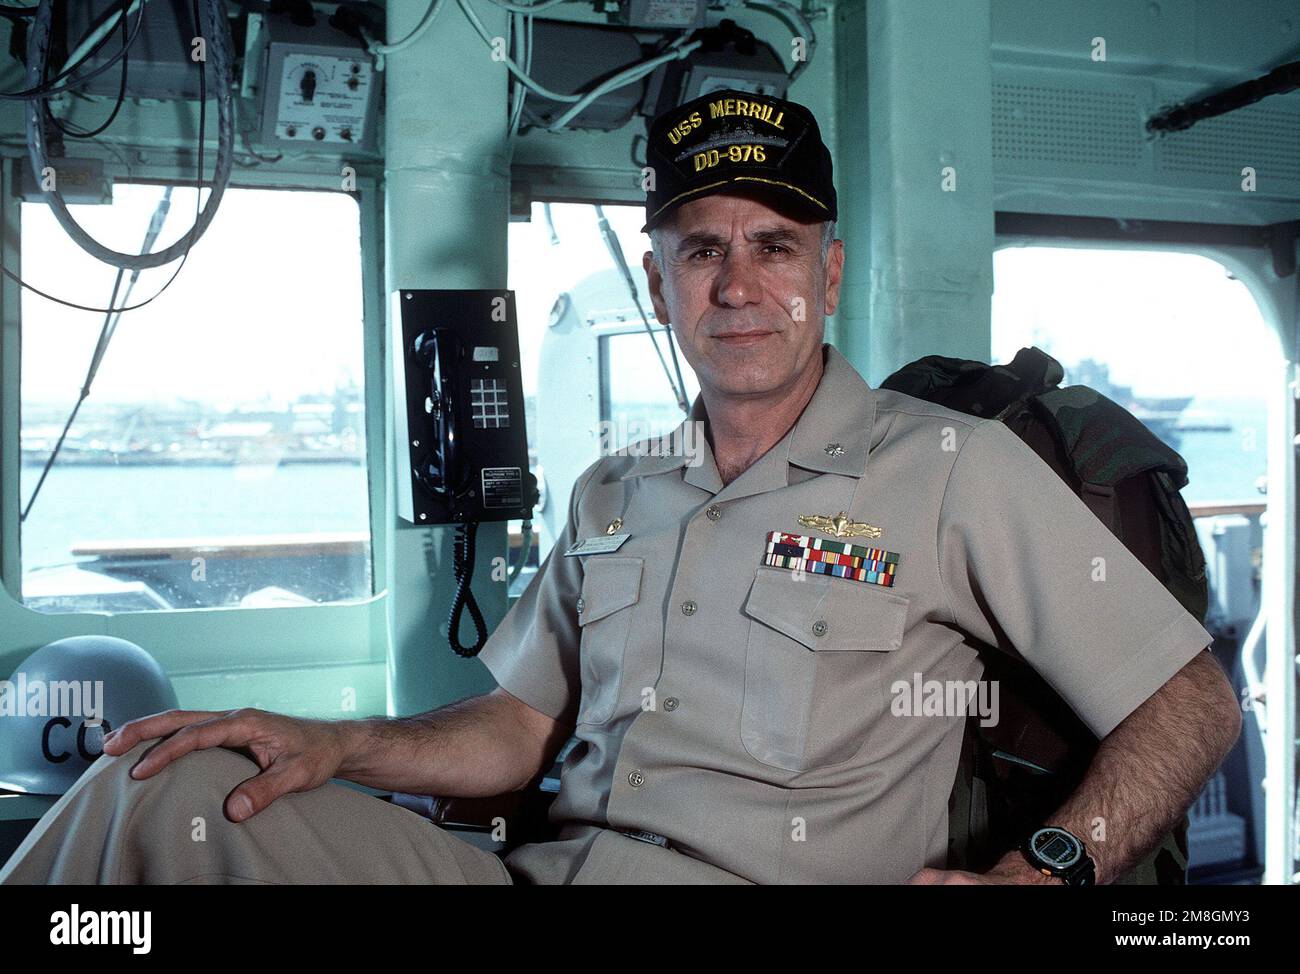 CDR Jose L. Betancourt, commanding officer, poses for a photograph on the bridge of his ship, the destroyer USS MERRILL (DD-976). Base: Naval Air Station, San Diego State: California(CA) Country: United States Of America (USA) Stock Photo